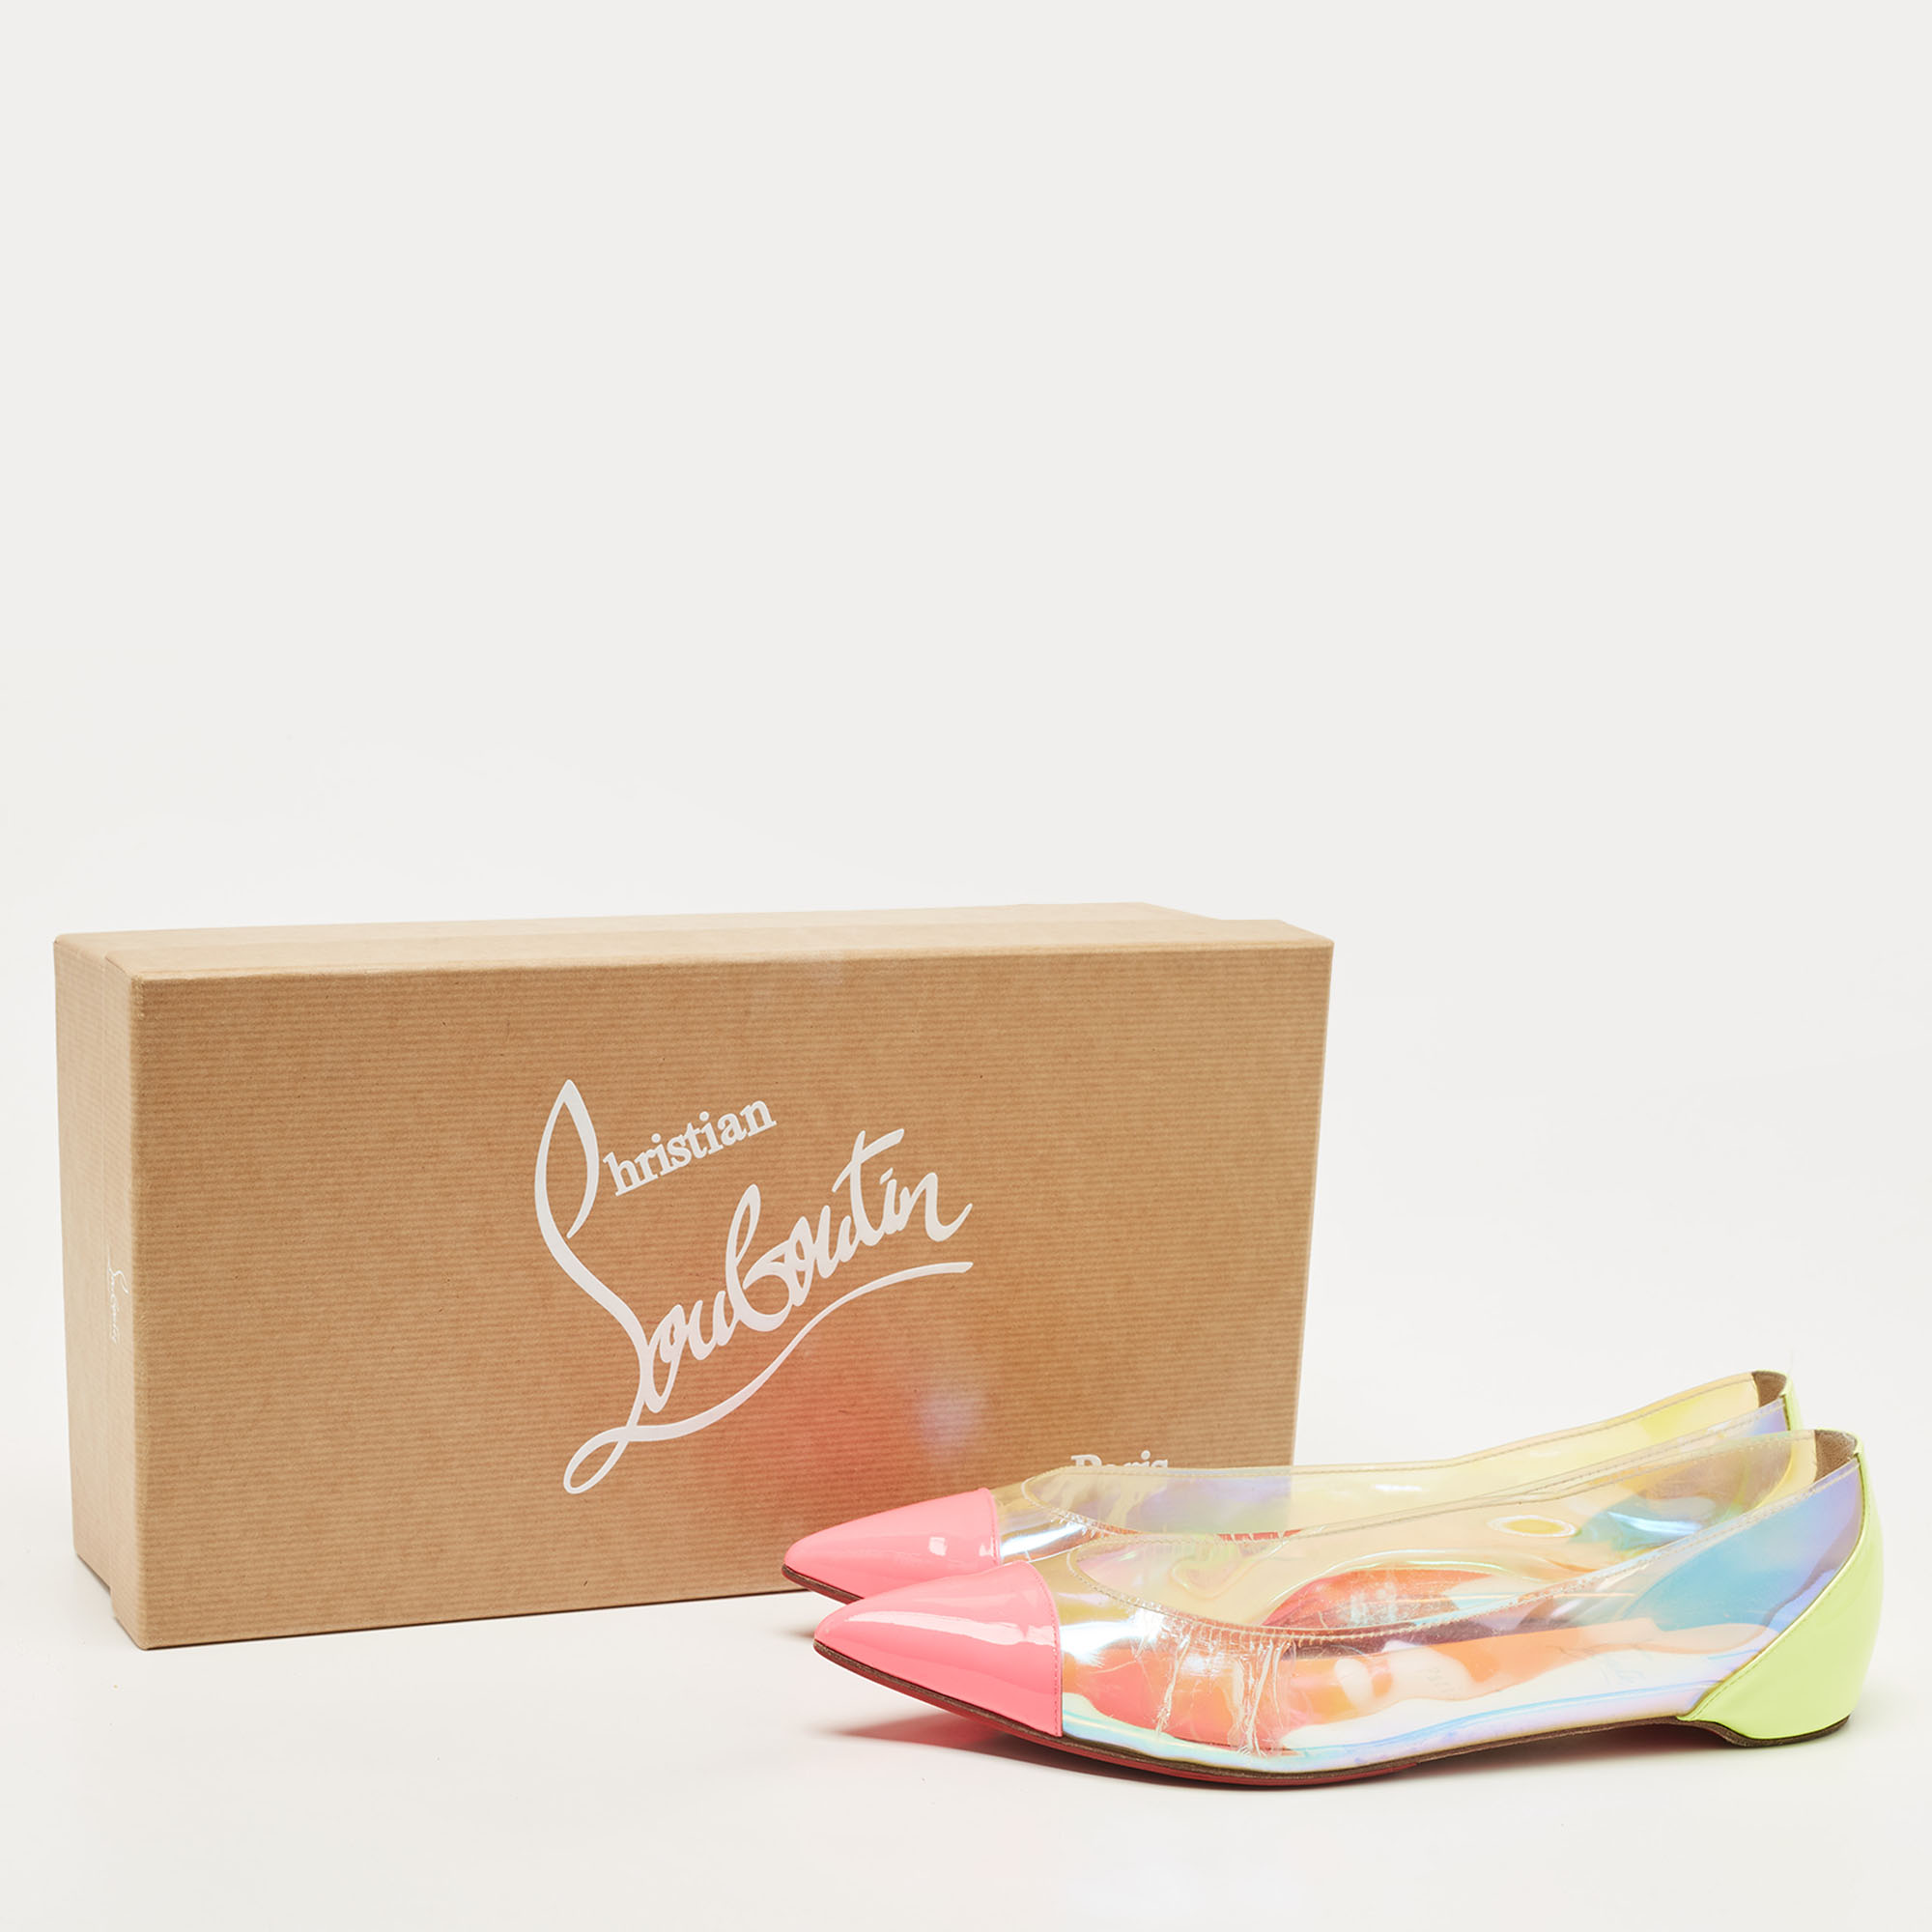 Christian Louboutin Two Tone Patent Leather And Iridescent PVC Corbeau Ballet Flats Size 40